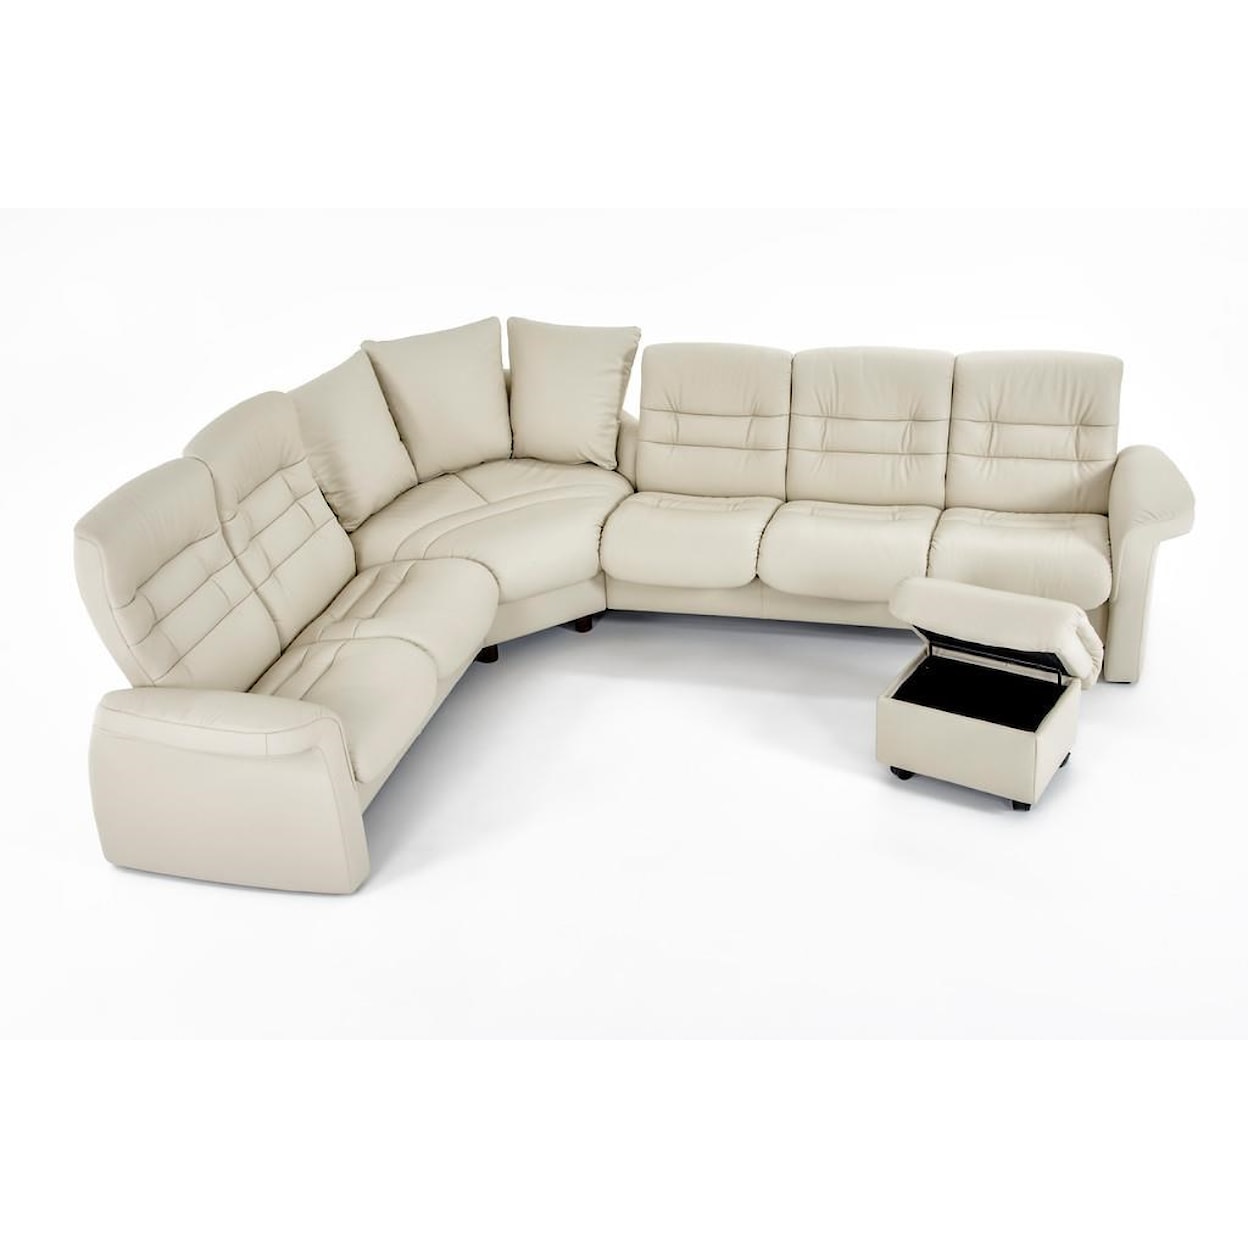 Stressless by Ekornes Stressless Sapphire 4 Pc Reclining Sectional Sofa